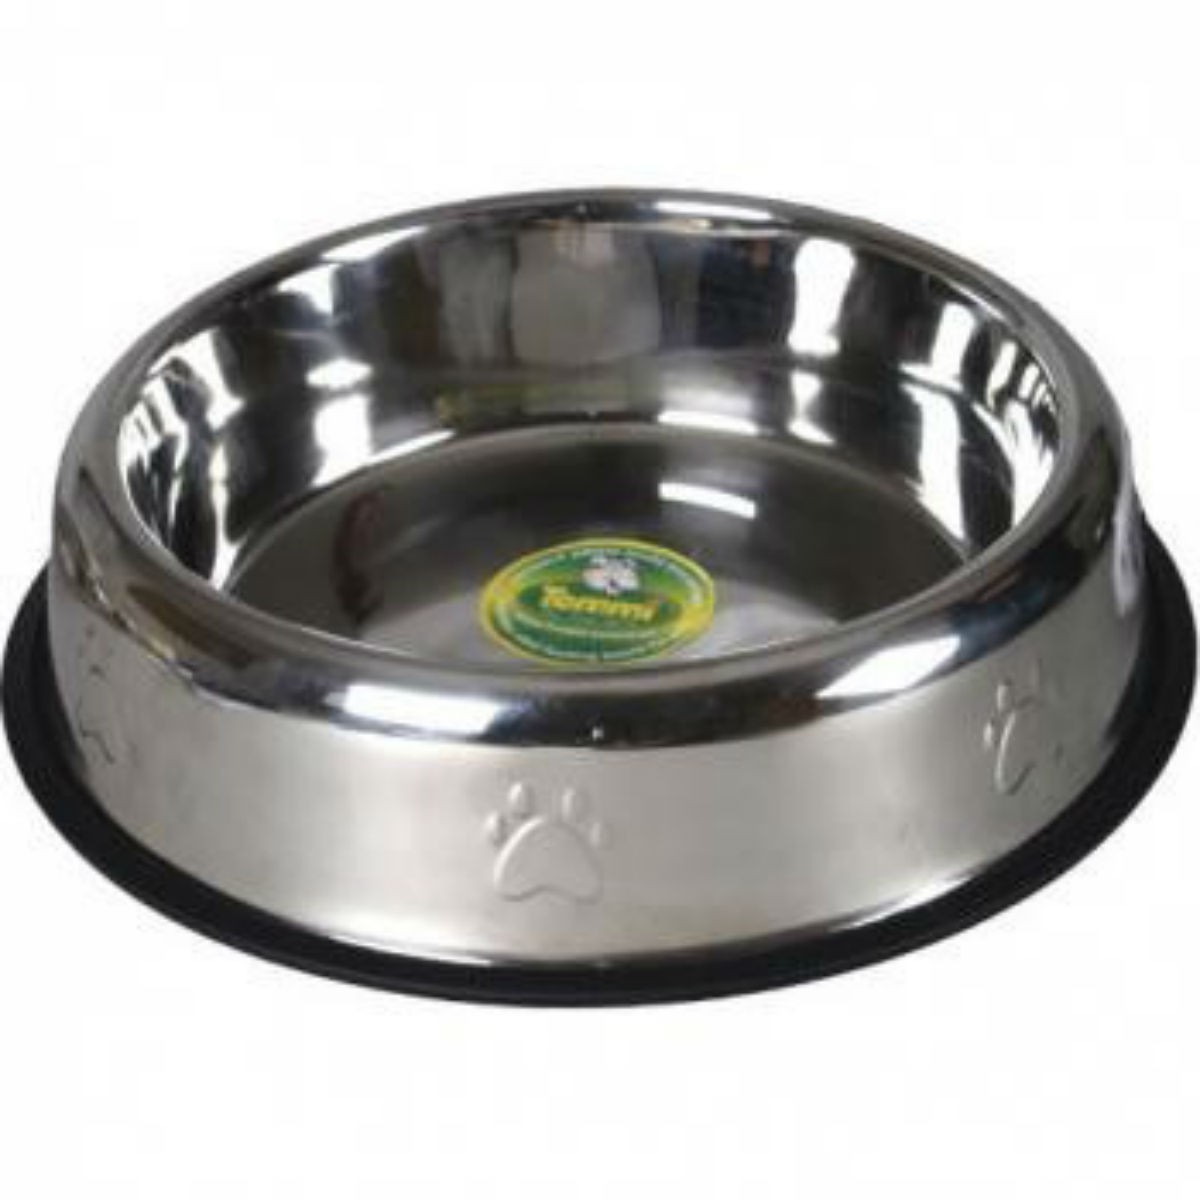 Stable stainless steel bowl, decorated with 450ml